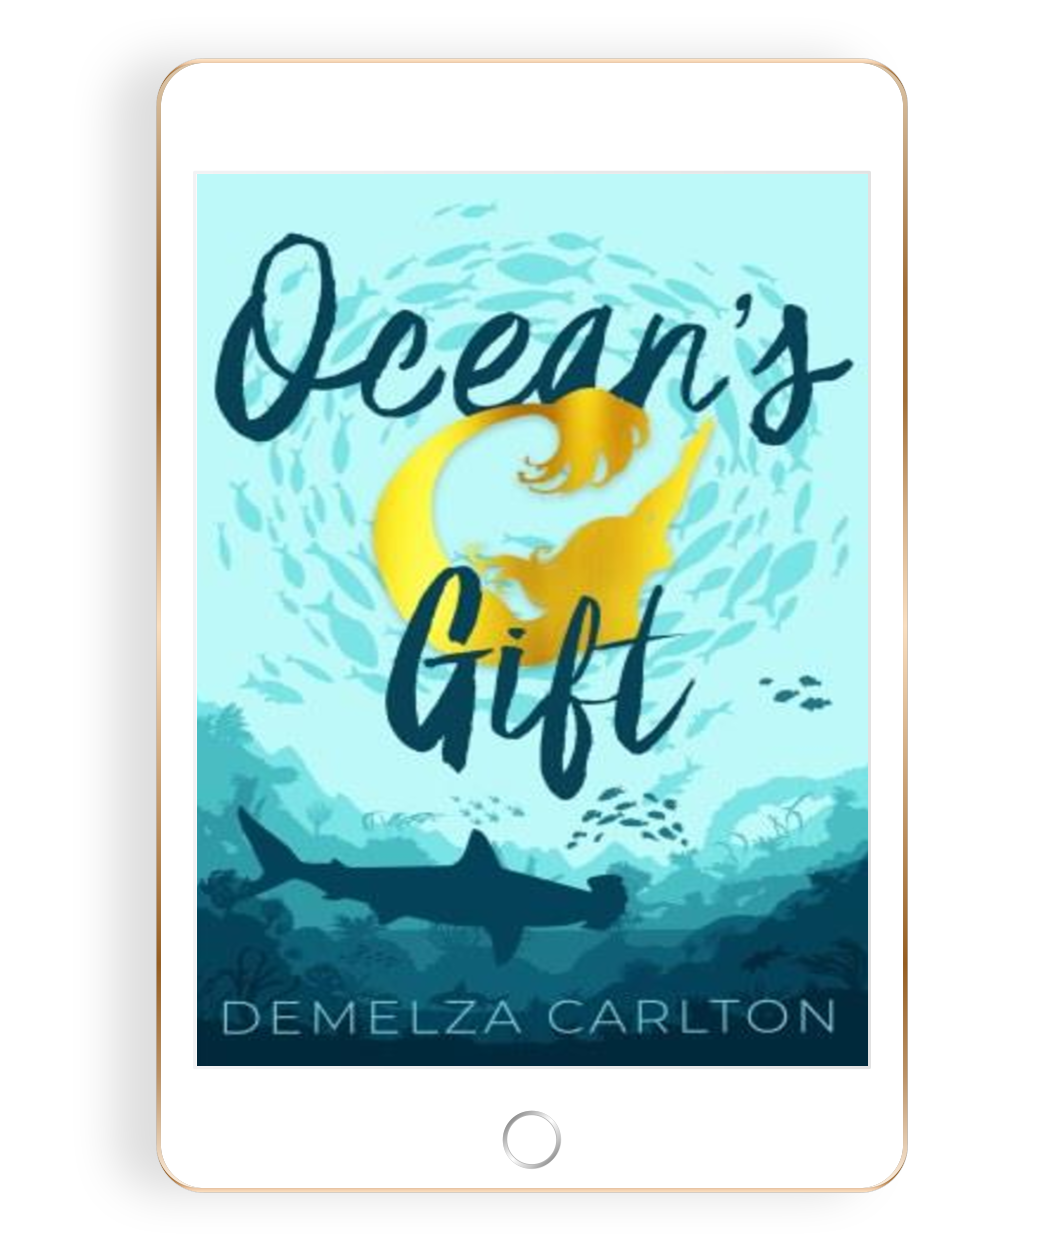 Ocean's Gift Book 2 in the Siren of Secrets series by USA Today Bestselling Author Demelza Carlton ebook